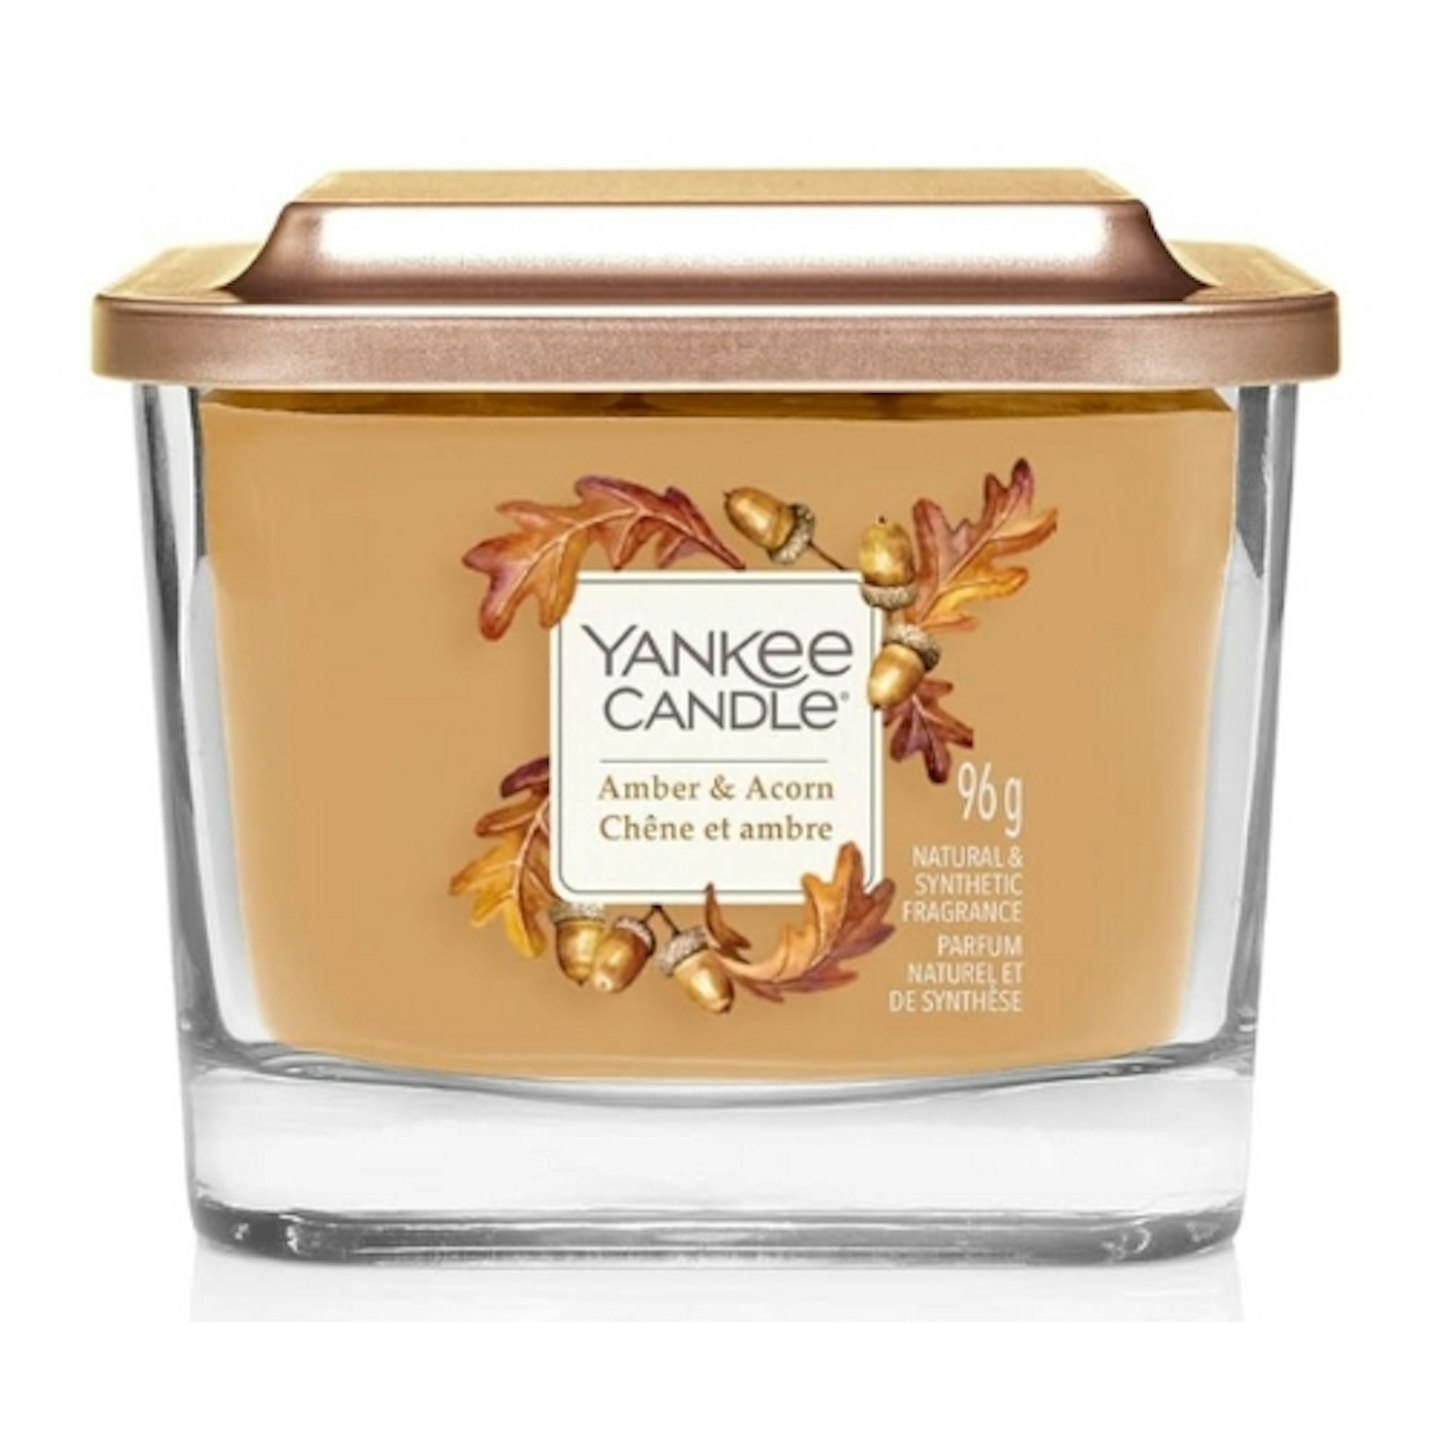 Yankee Candle Candle, Amber & Acorn, Small